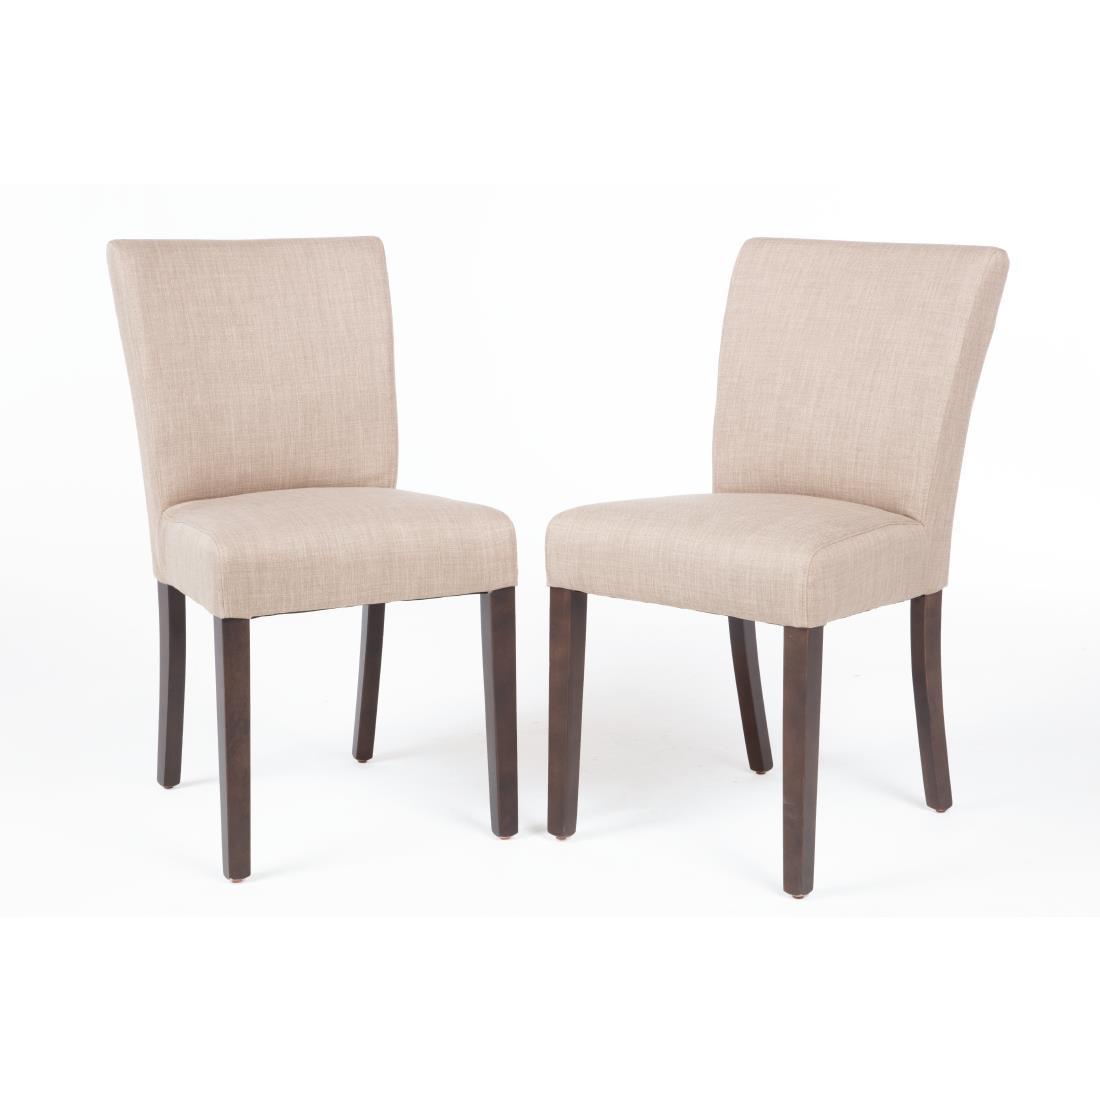 GR367 - Bolero Contemporary Dining Chair Natural (Pack 2) - GR367  - 4